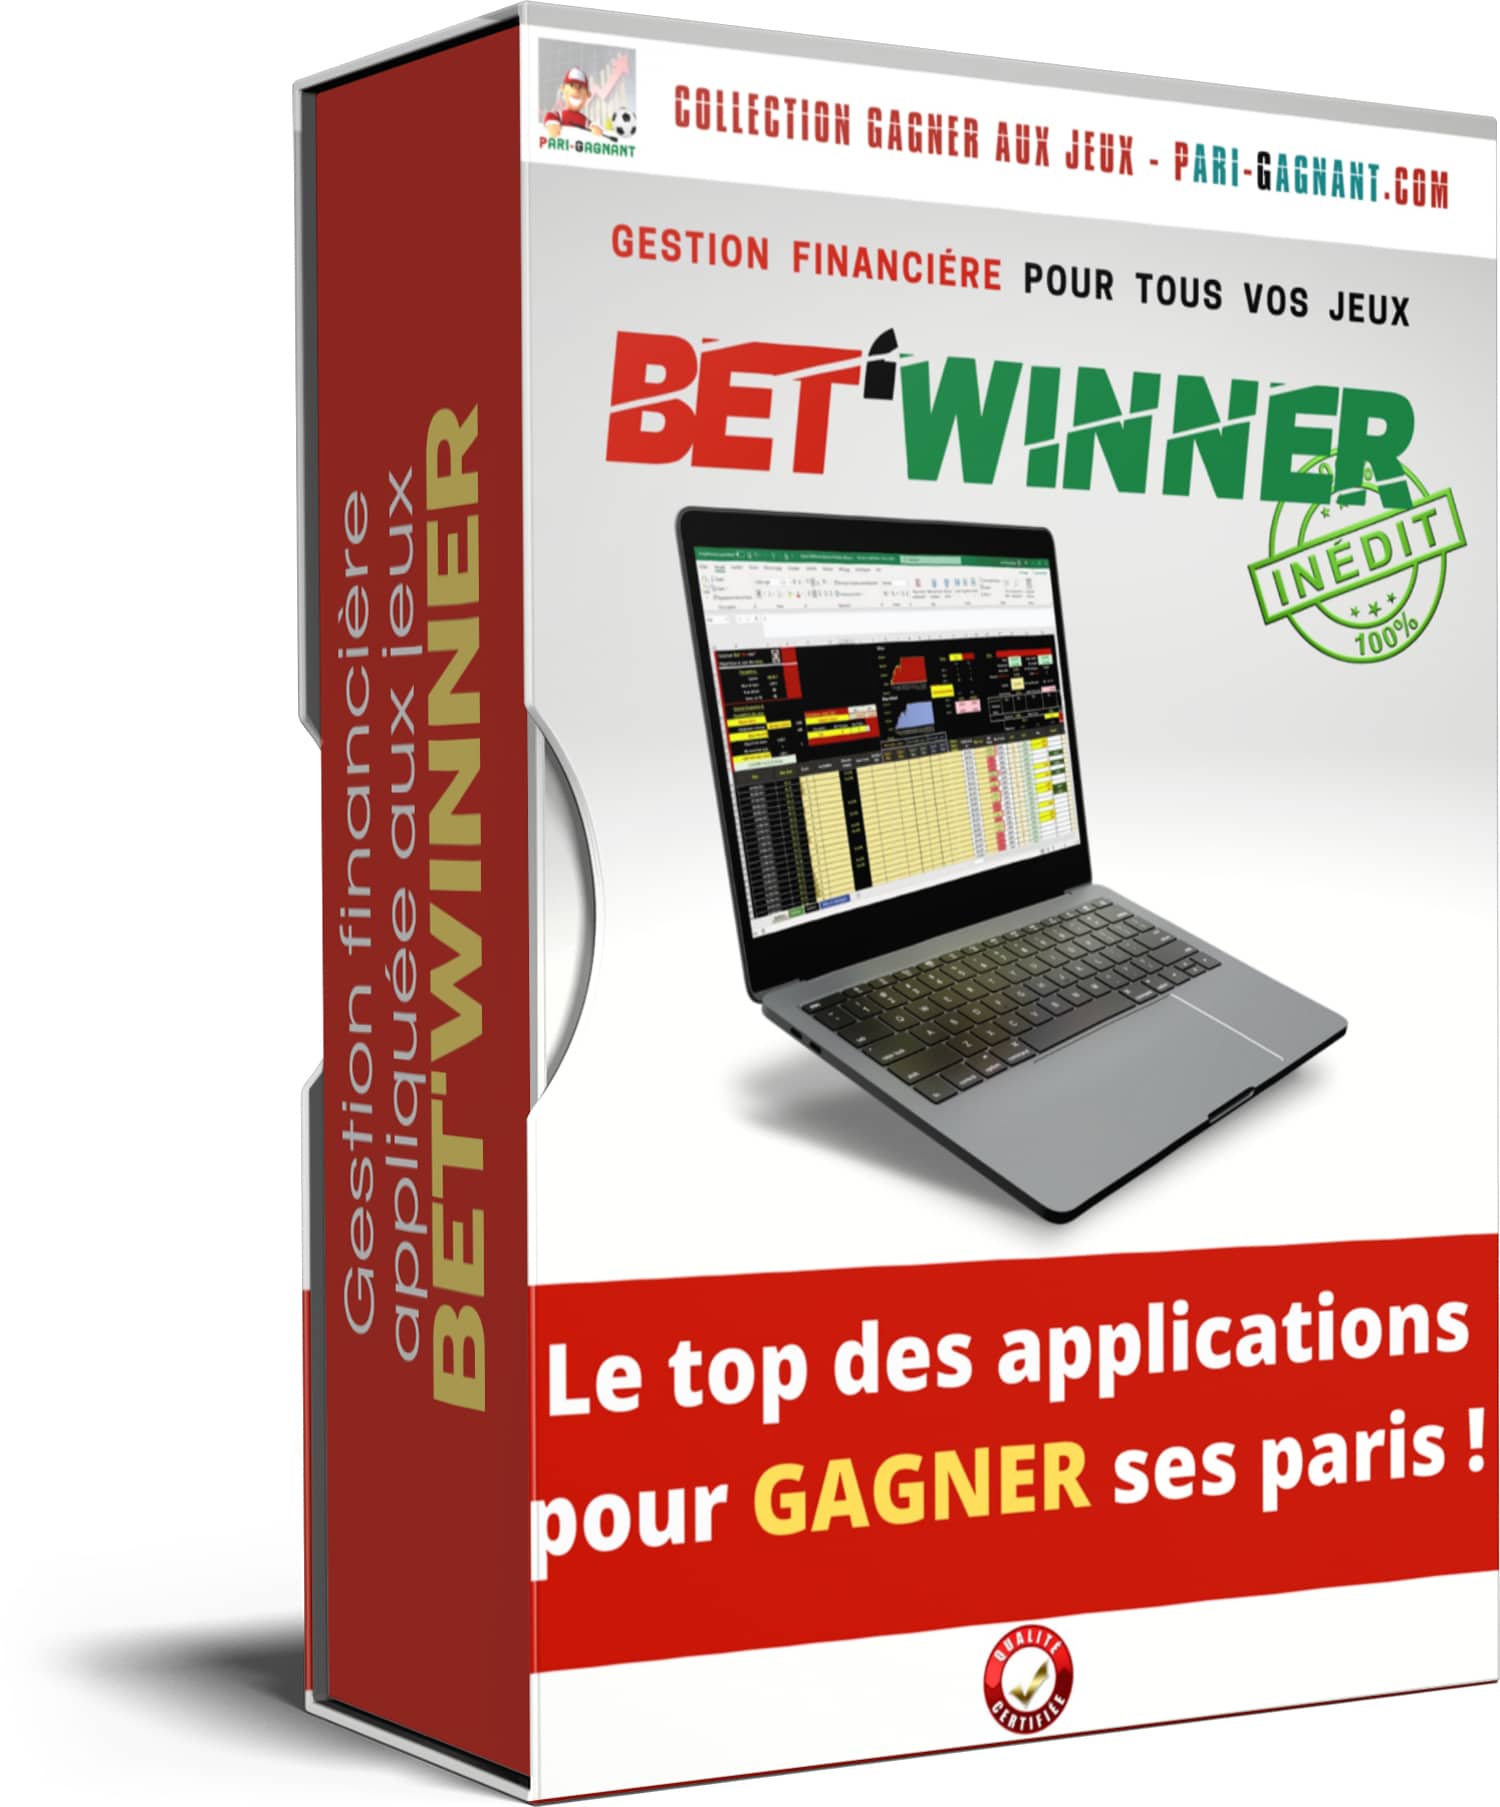 Betwinner Online Sports Betting - How To Be More Productive?